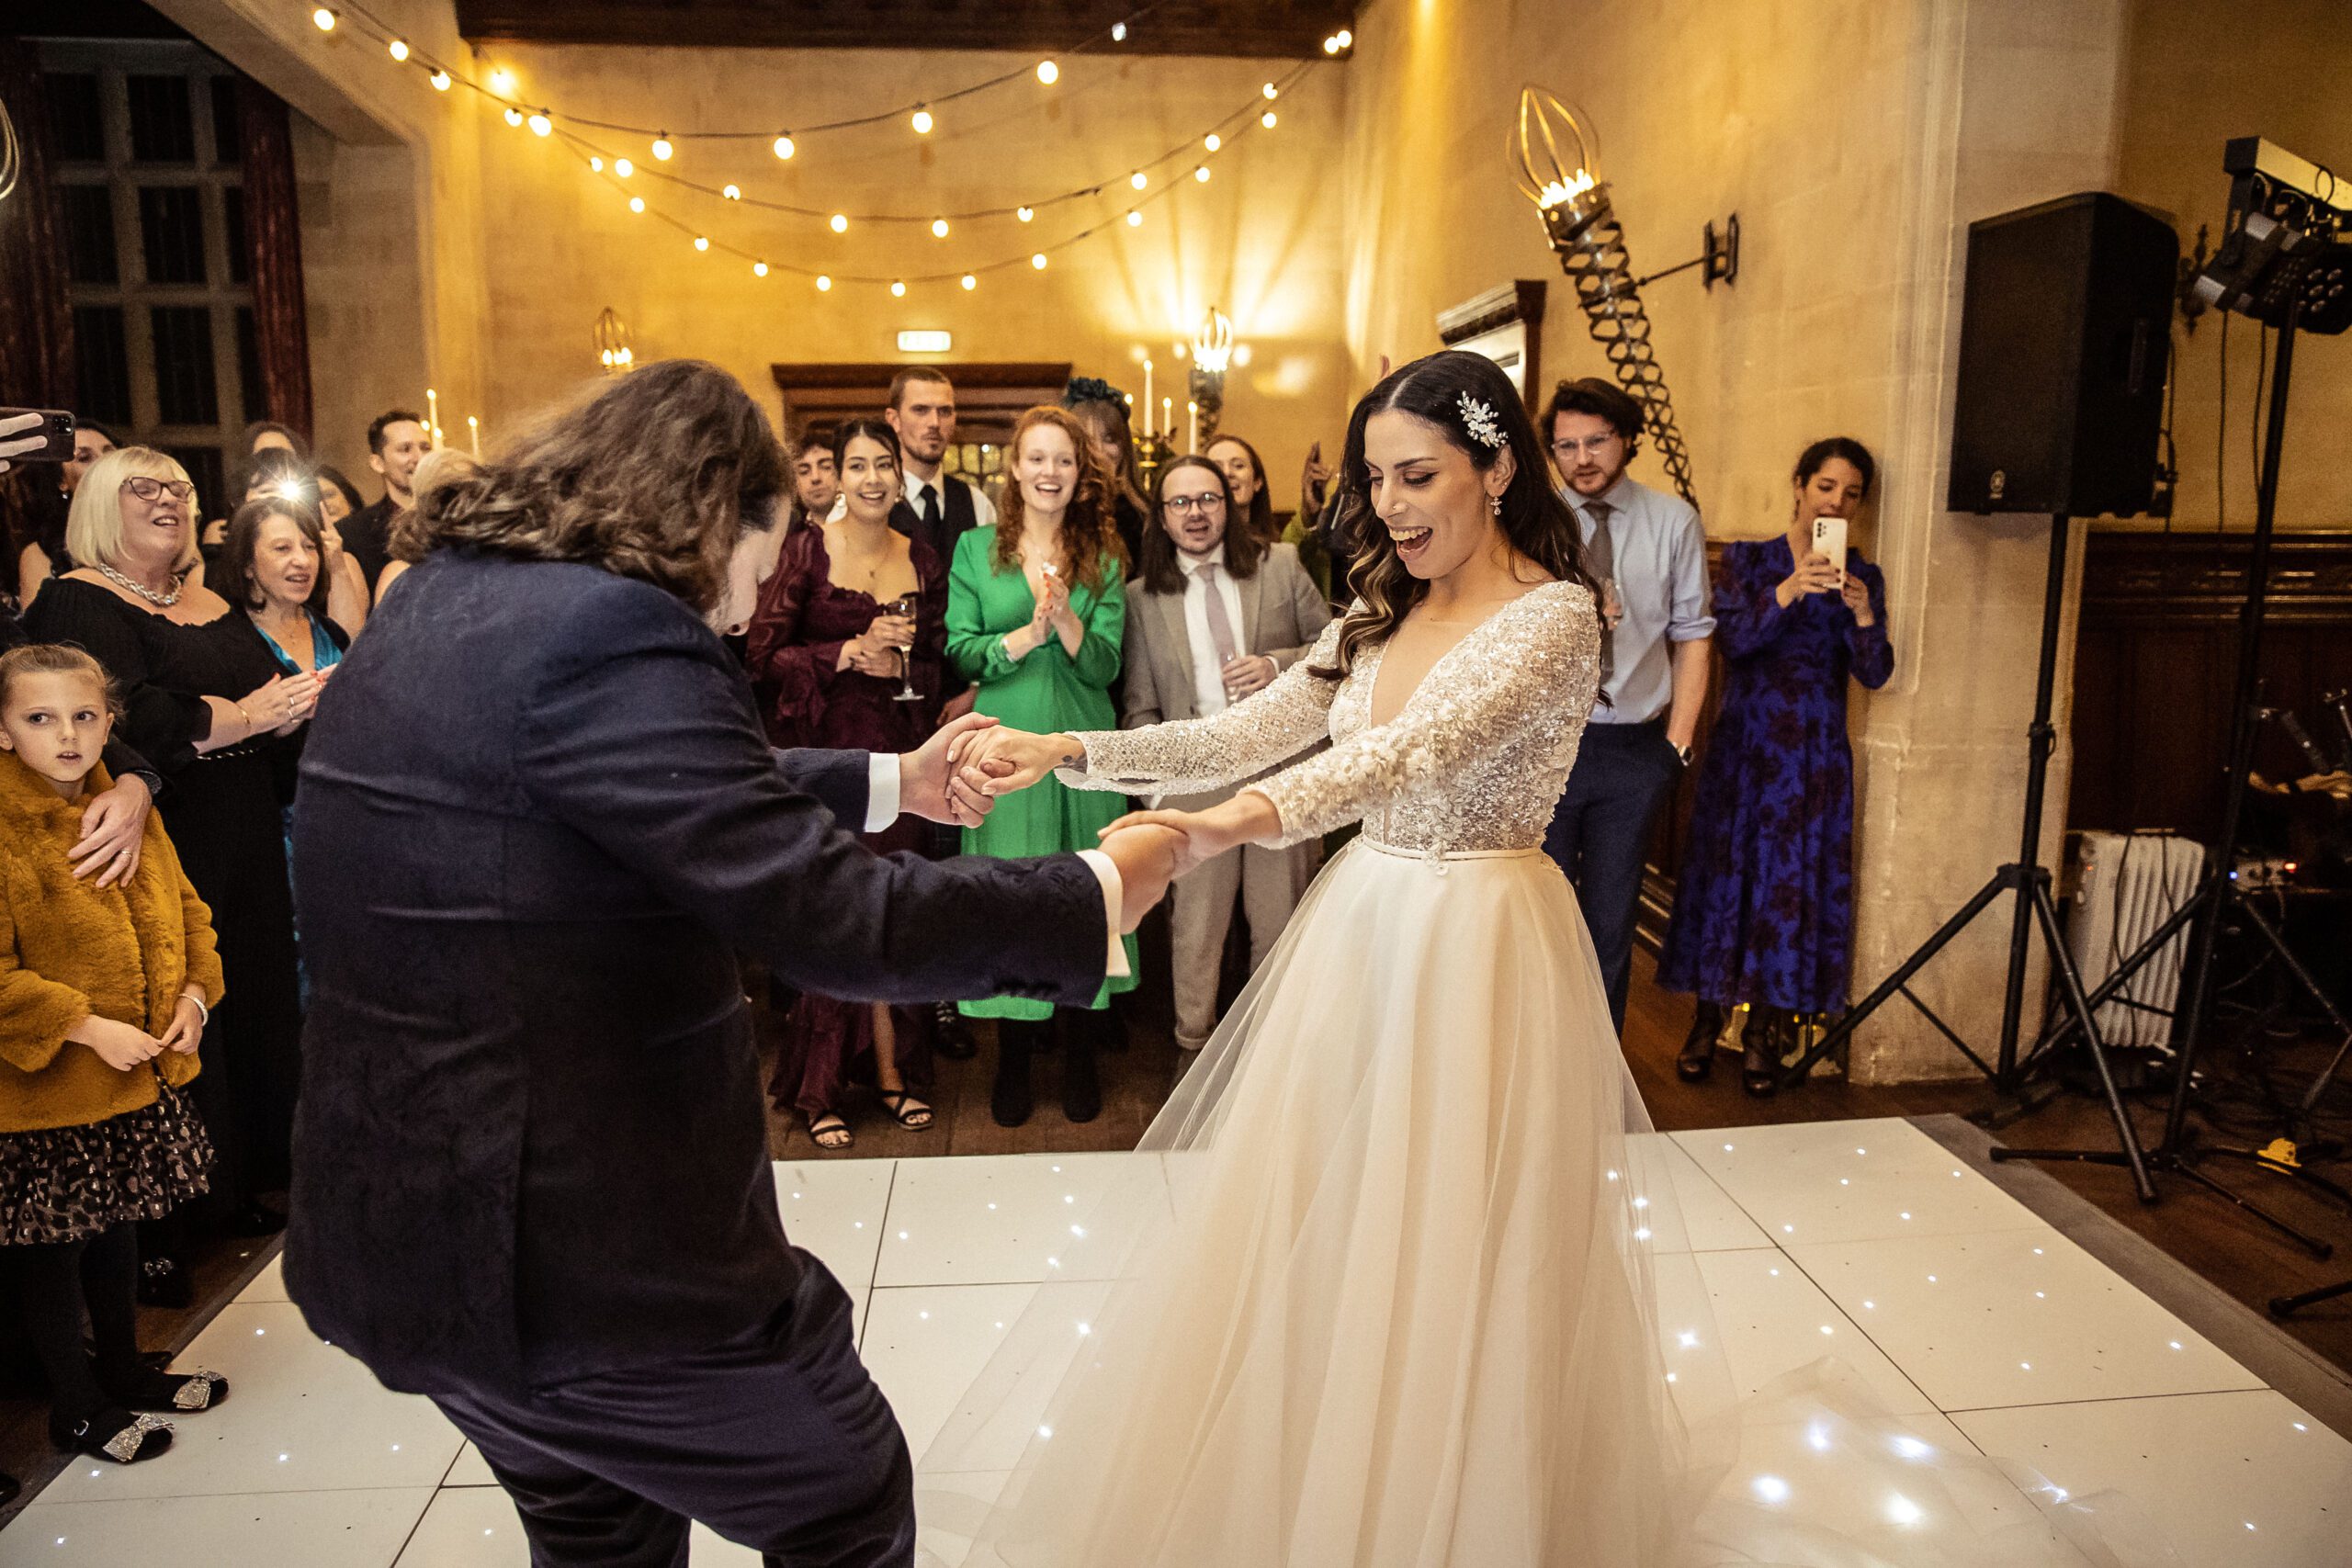 A bride and groom perform their first dance at their wedding at Fanhams Hall.